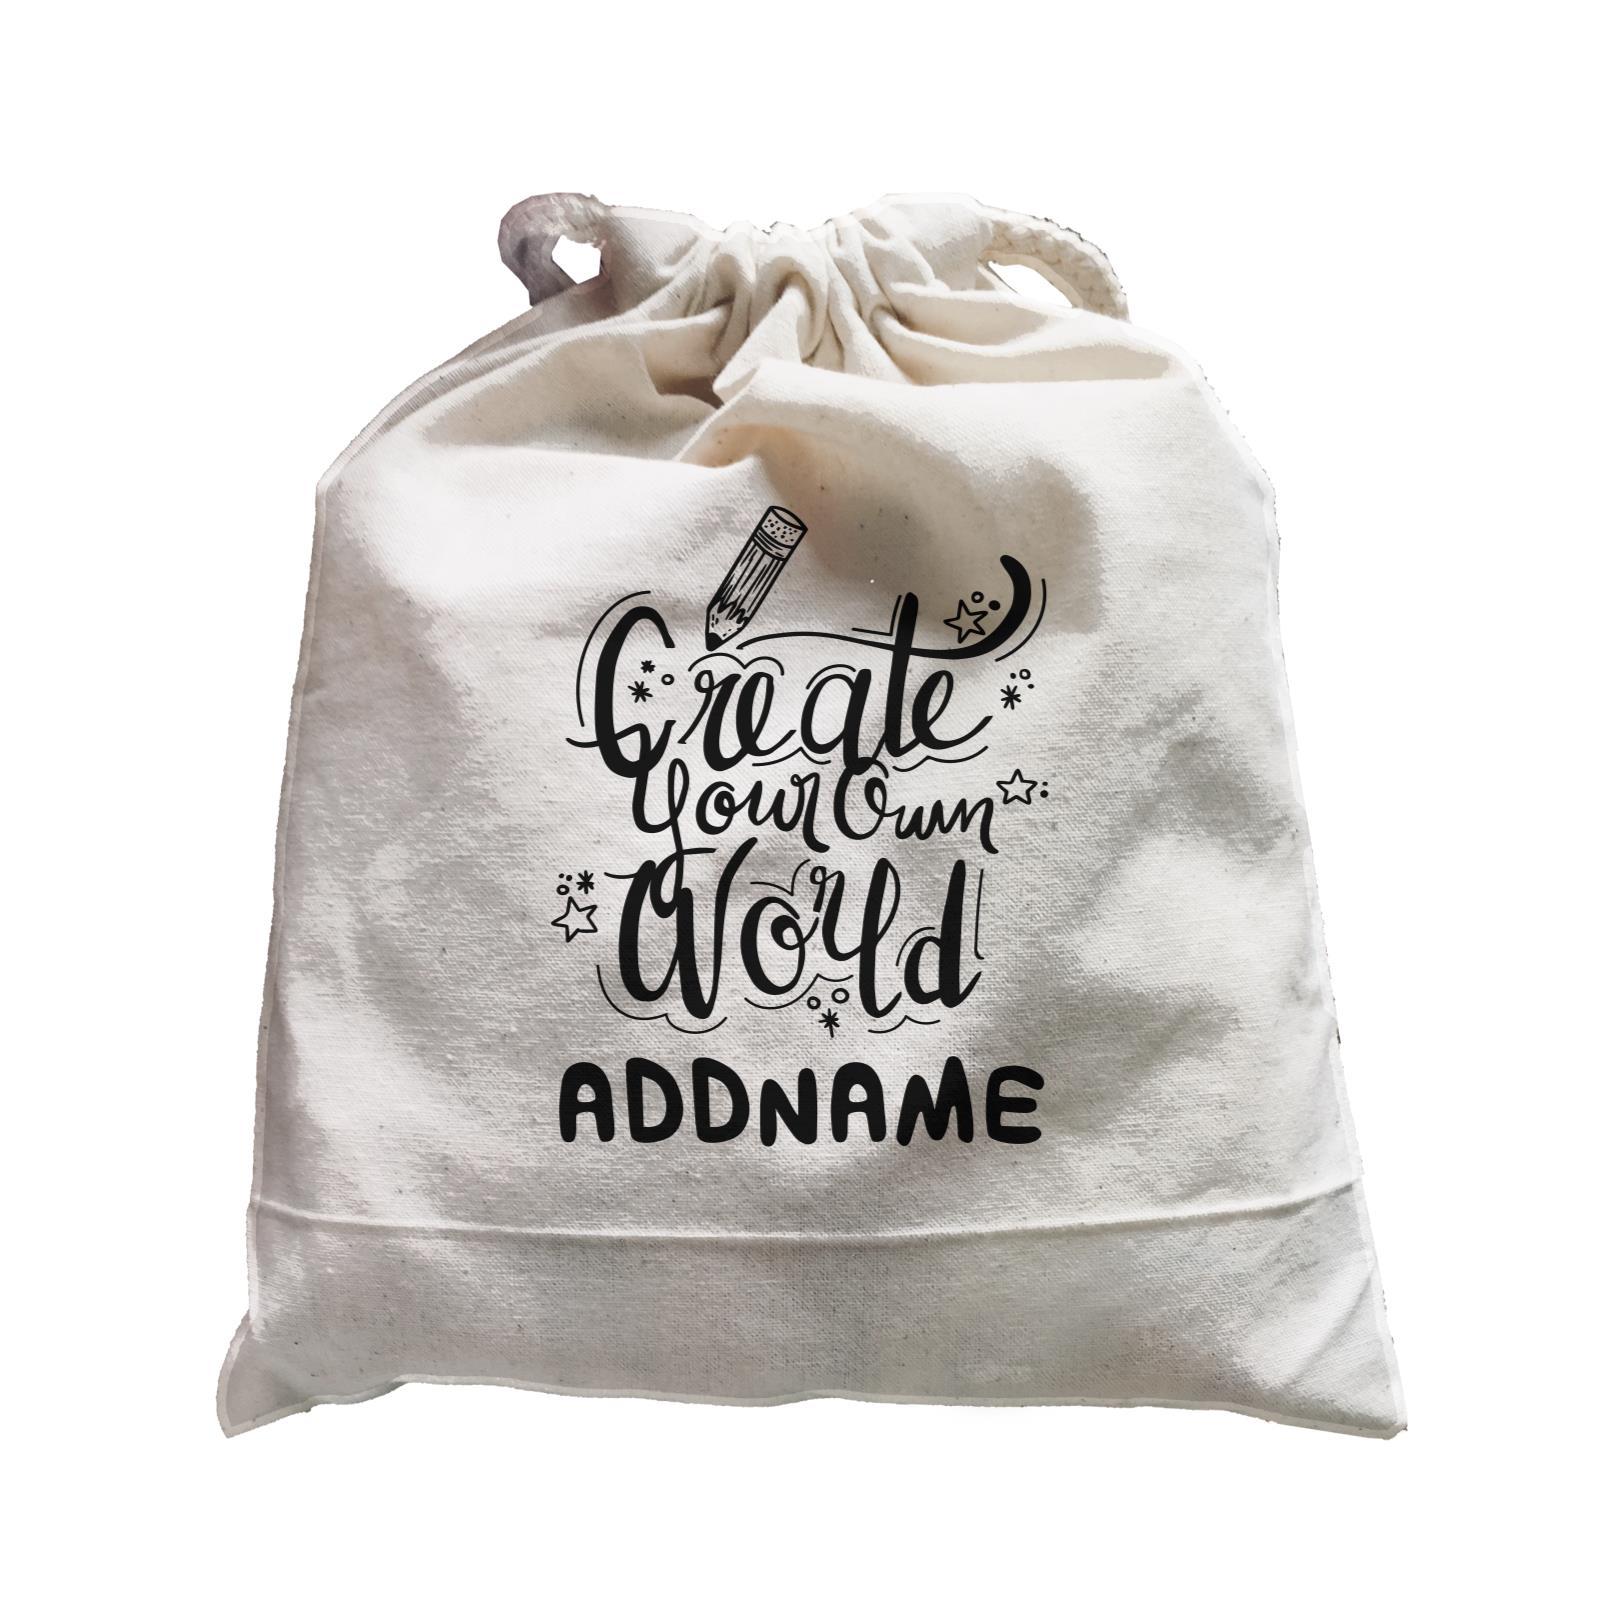 Children's Day Gift Series Create Your Own World Addname  Satchel